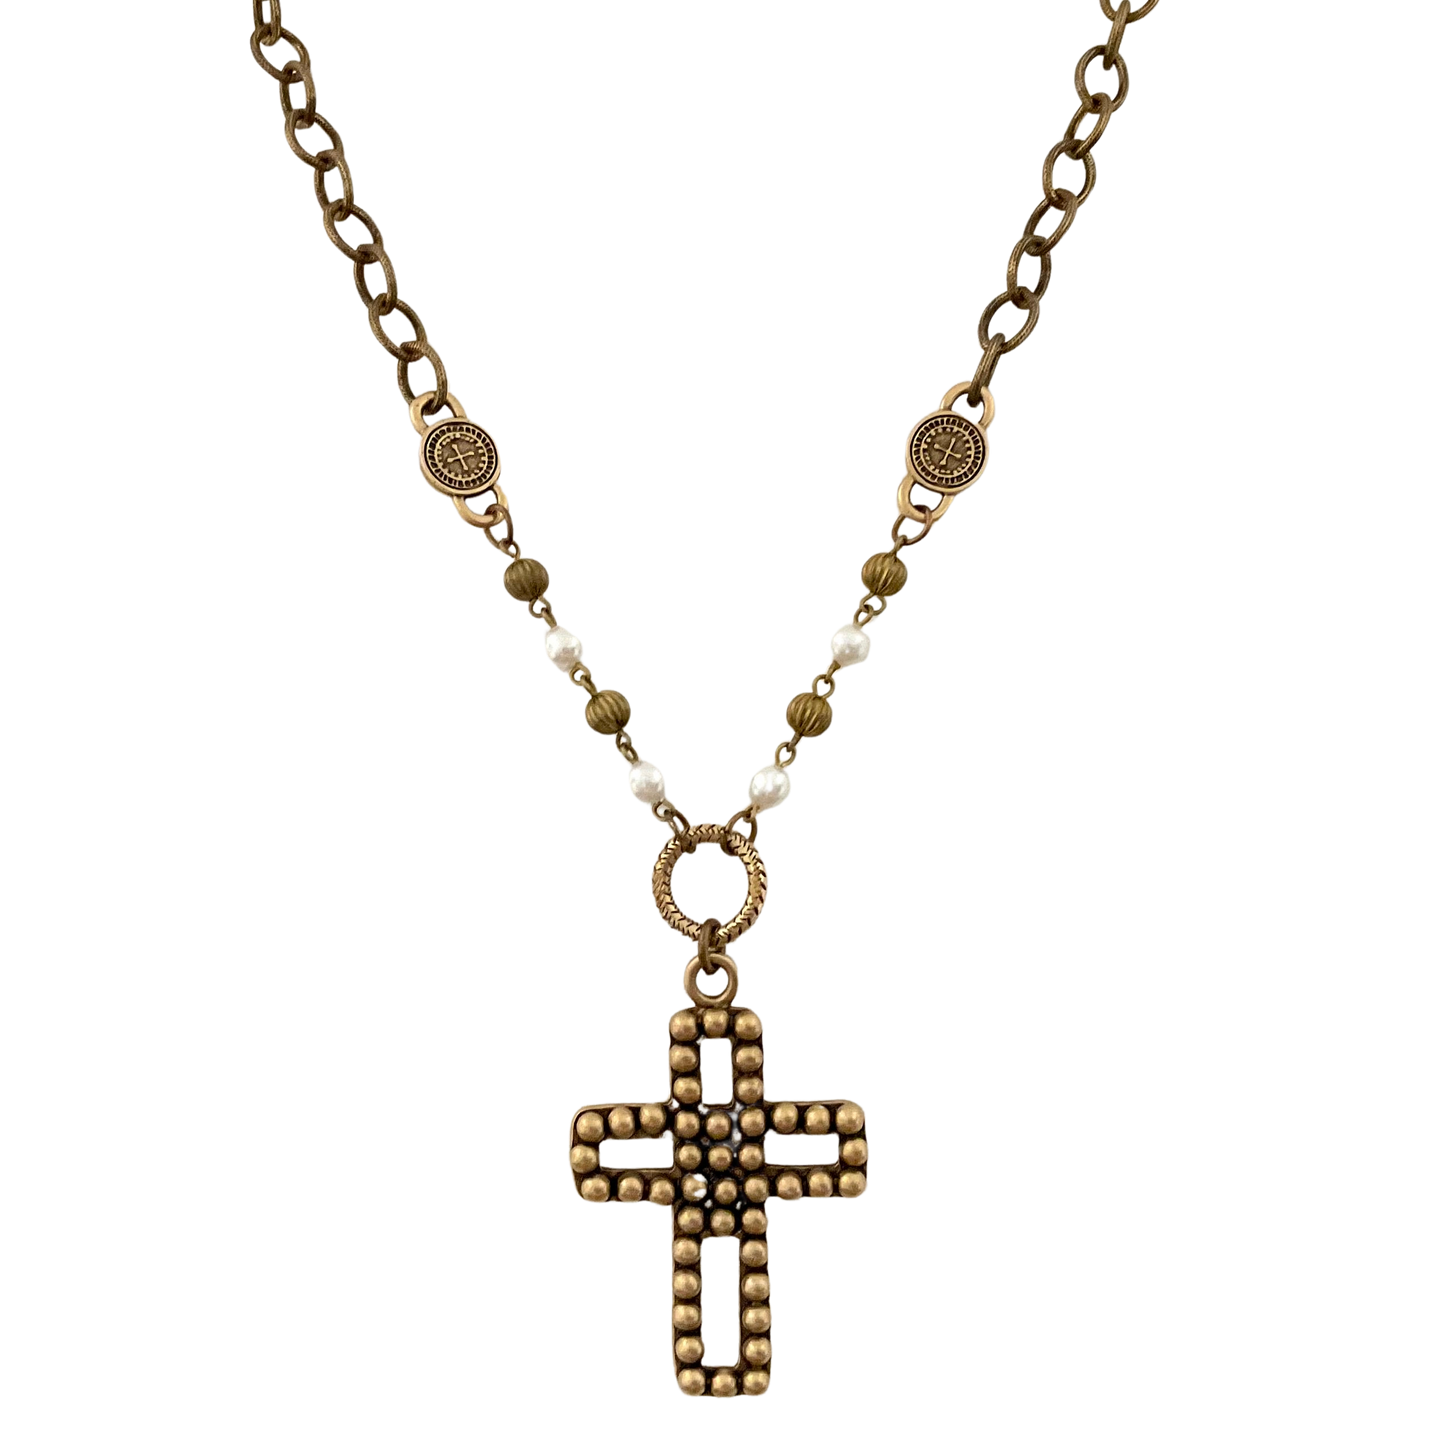 Antique Brass Chain with Vintage Cross Pendant 38"